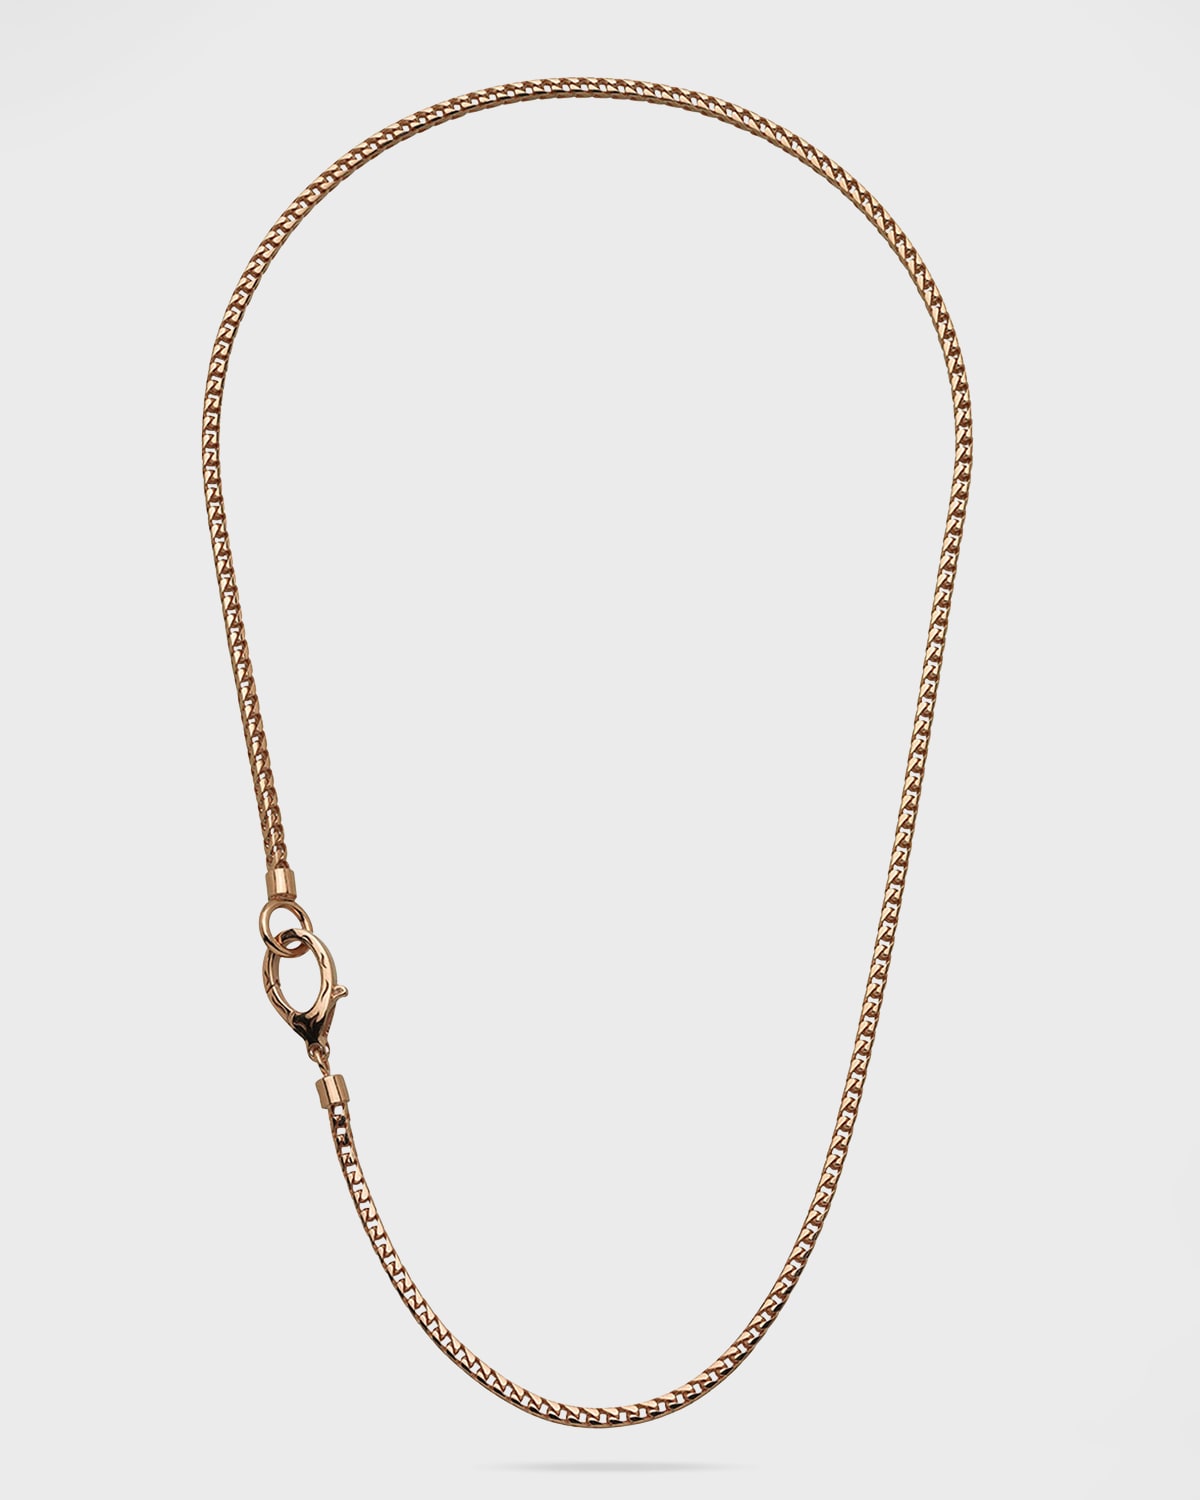 Marco Dal Maso Mesh Rose Gold Plated Silver Necklace, 24"l